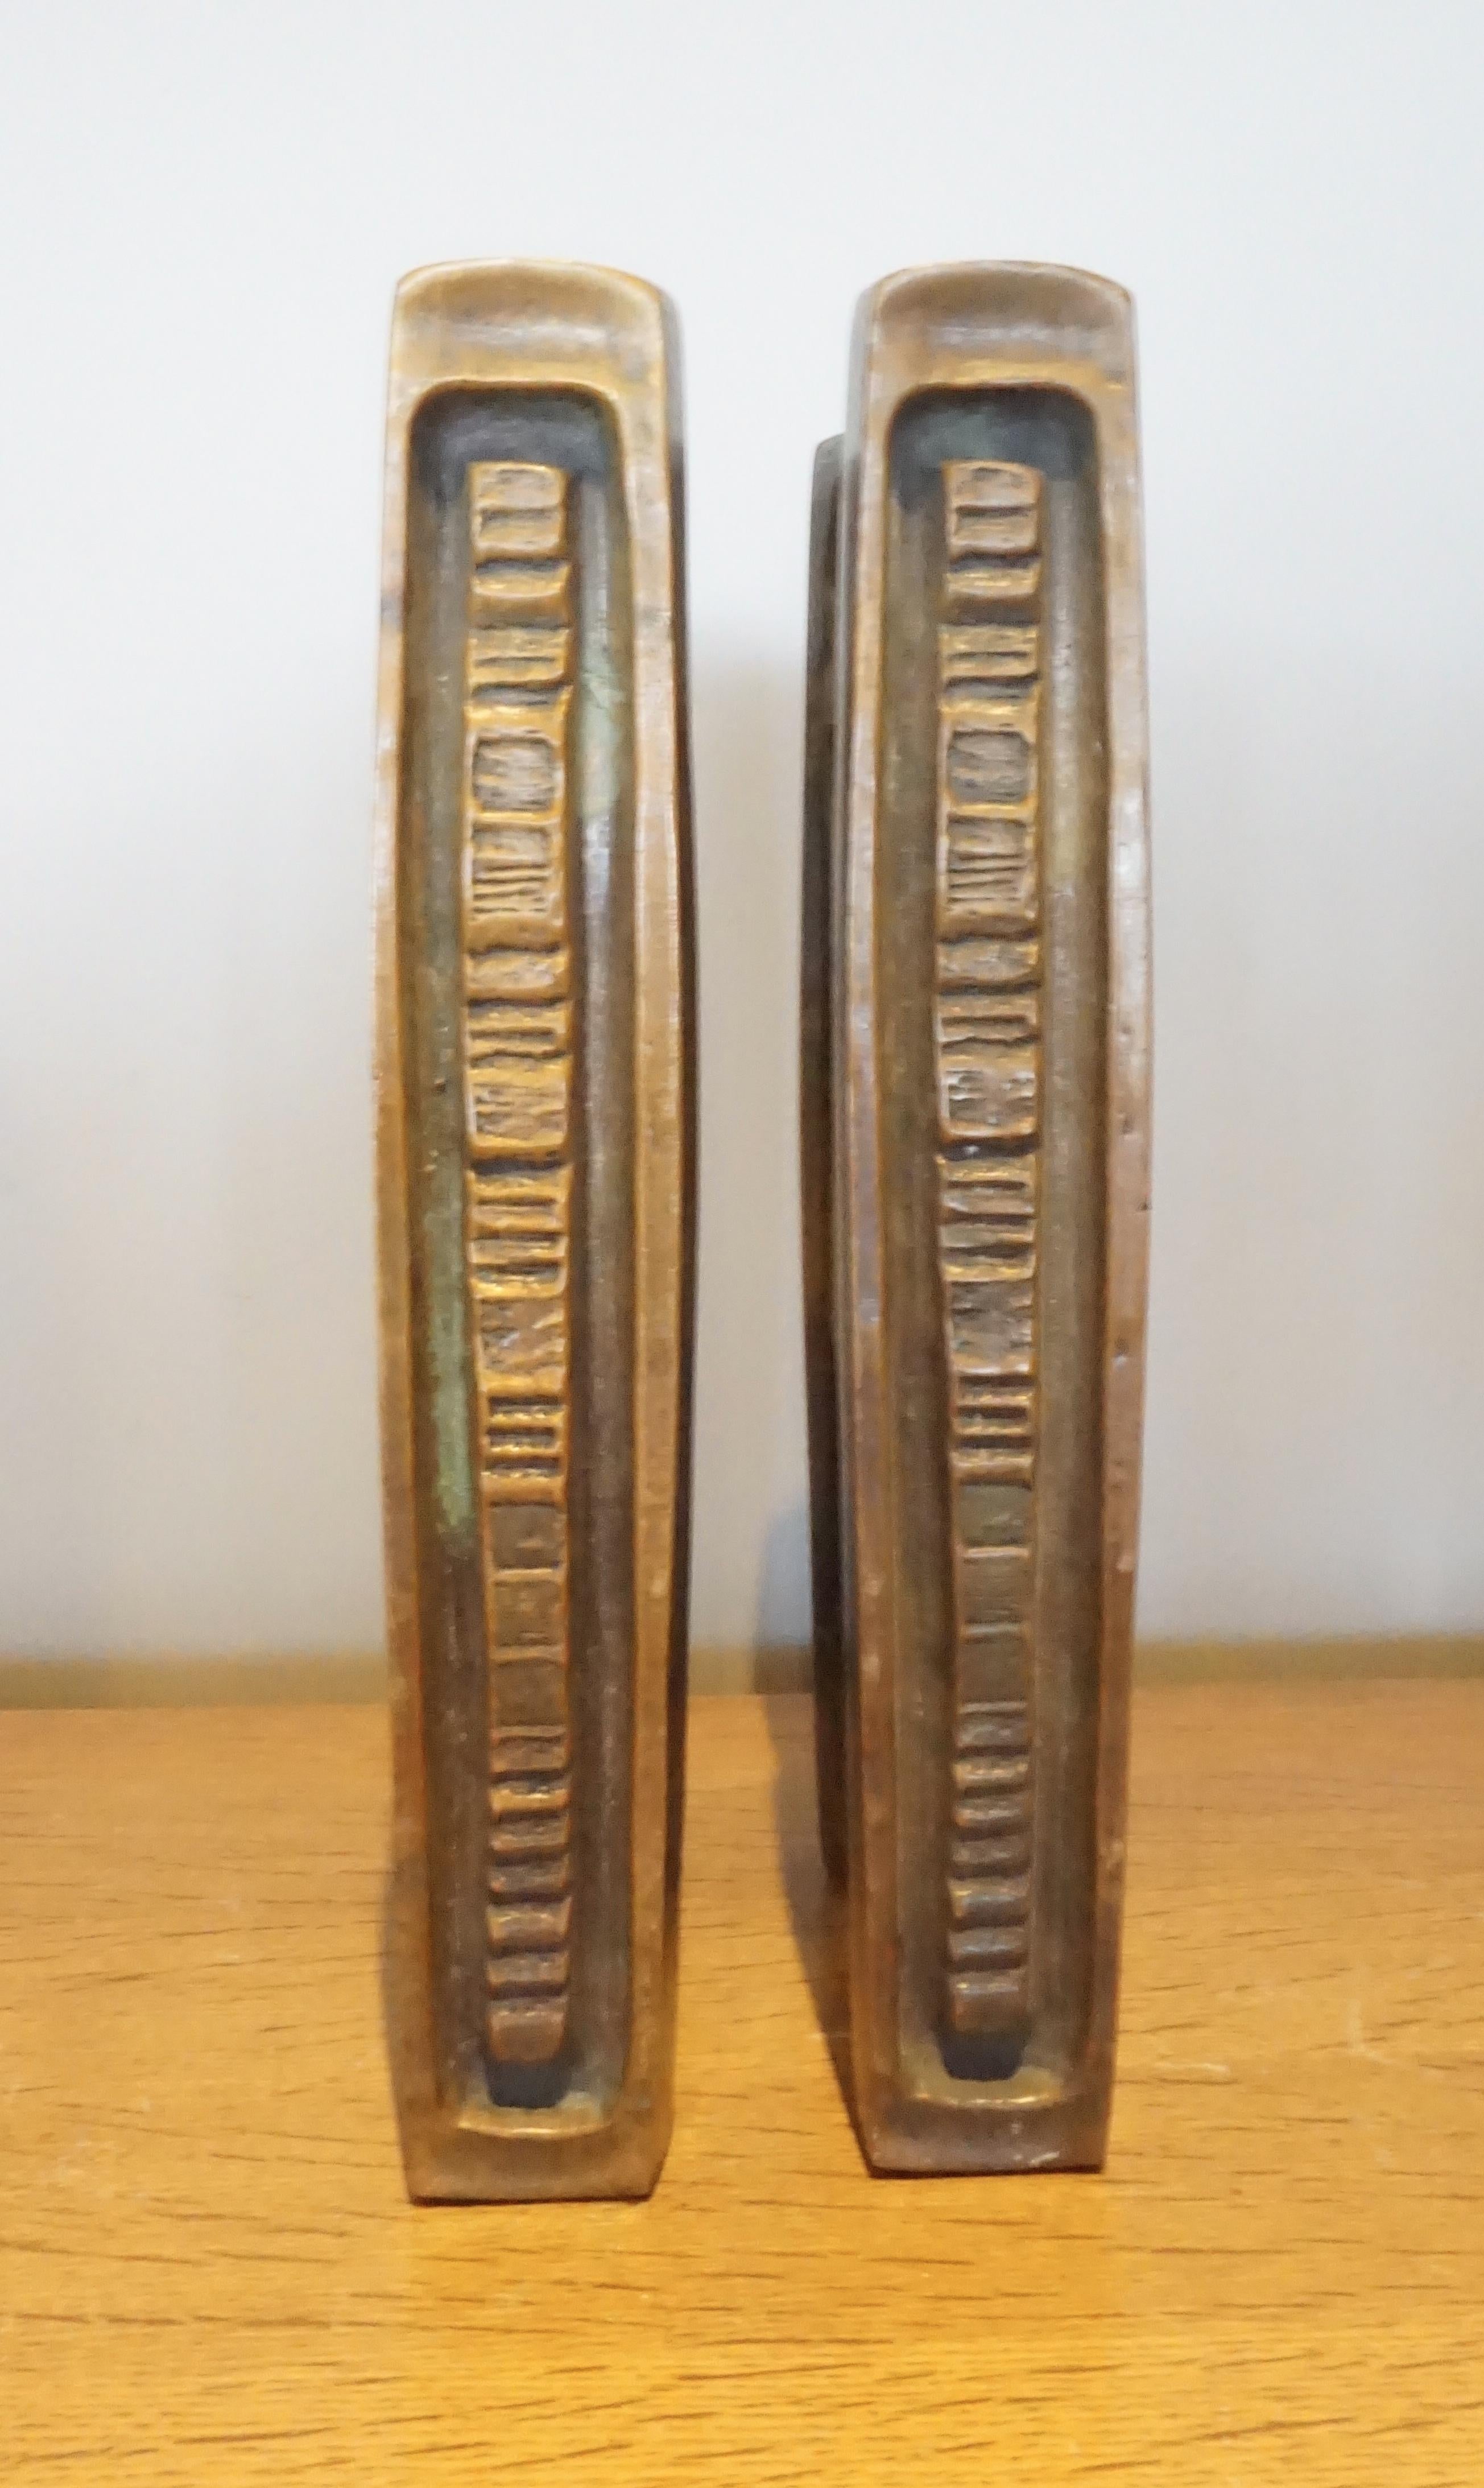 A pair of two-sided Mid-Century Modern solid bronze door handles made by the American hardware company Forms and Surfaces in the 1960s. These cast bronze pulls were created for double entry doors and are over-sized, extremely heavy and of superior